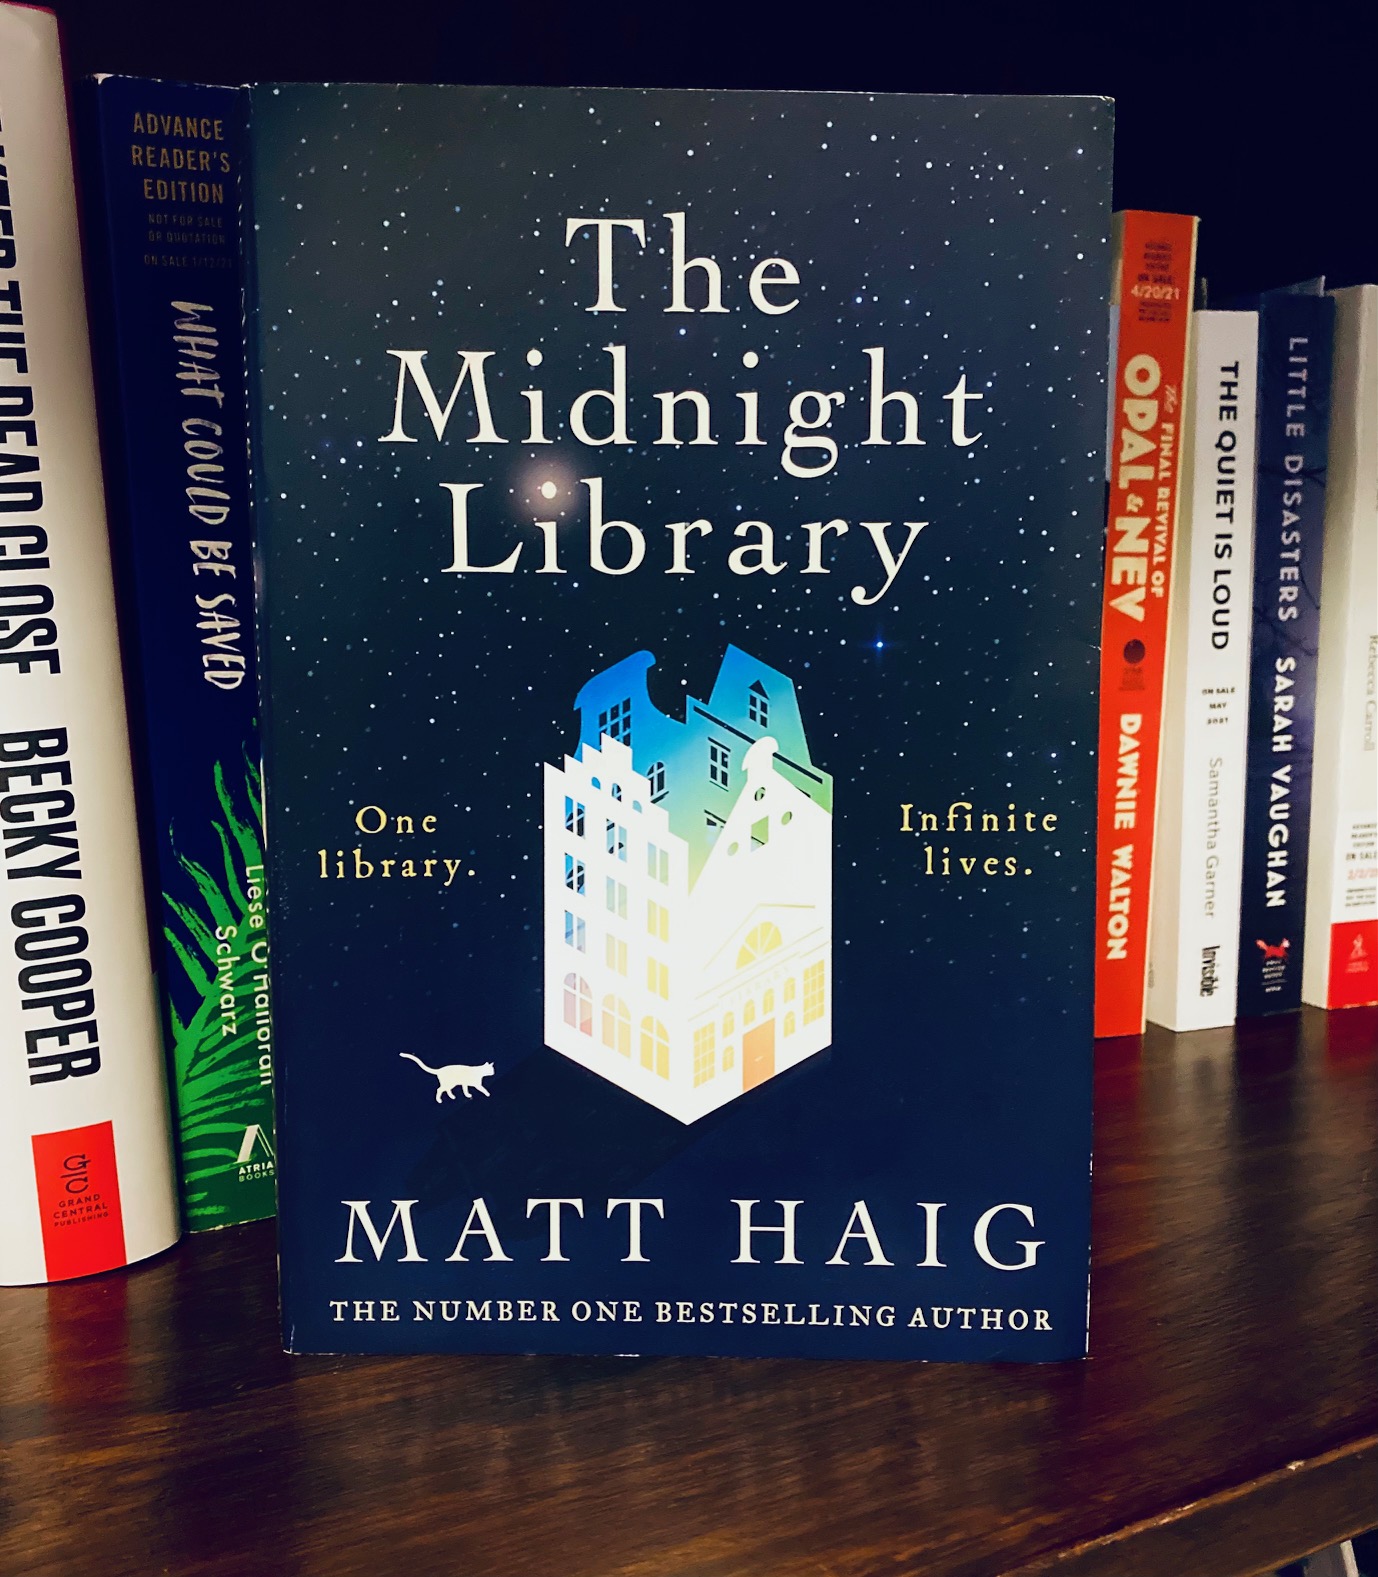 The Midnight Library by Matt Haig book, pictured on a wooden bookshelf in front of other books